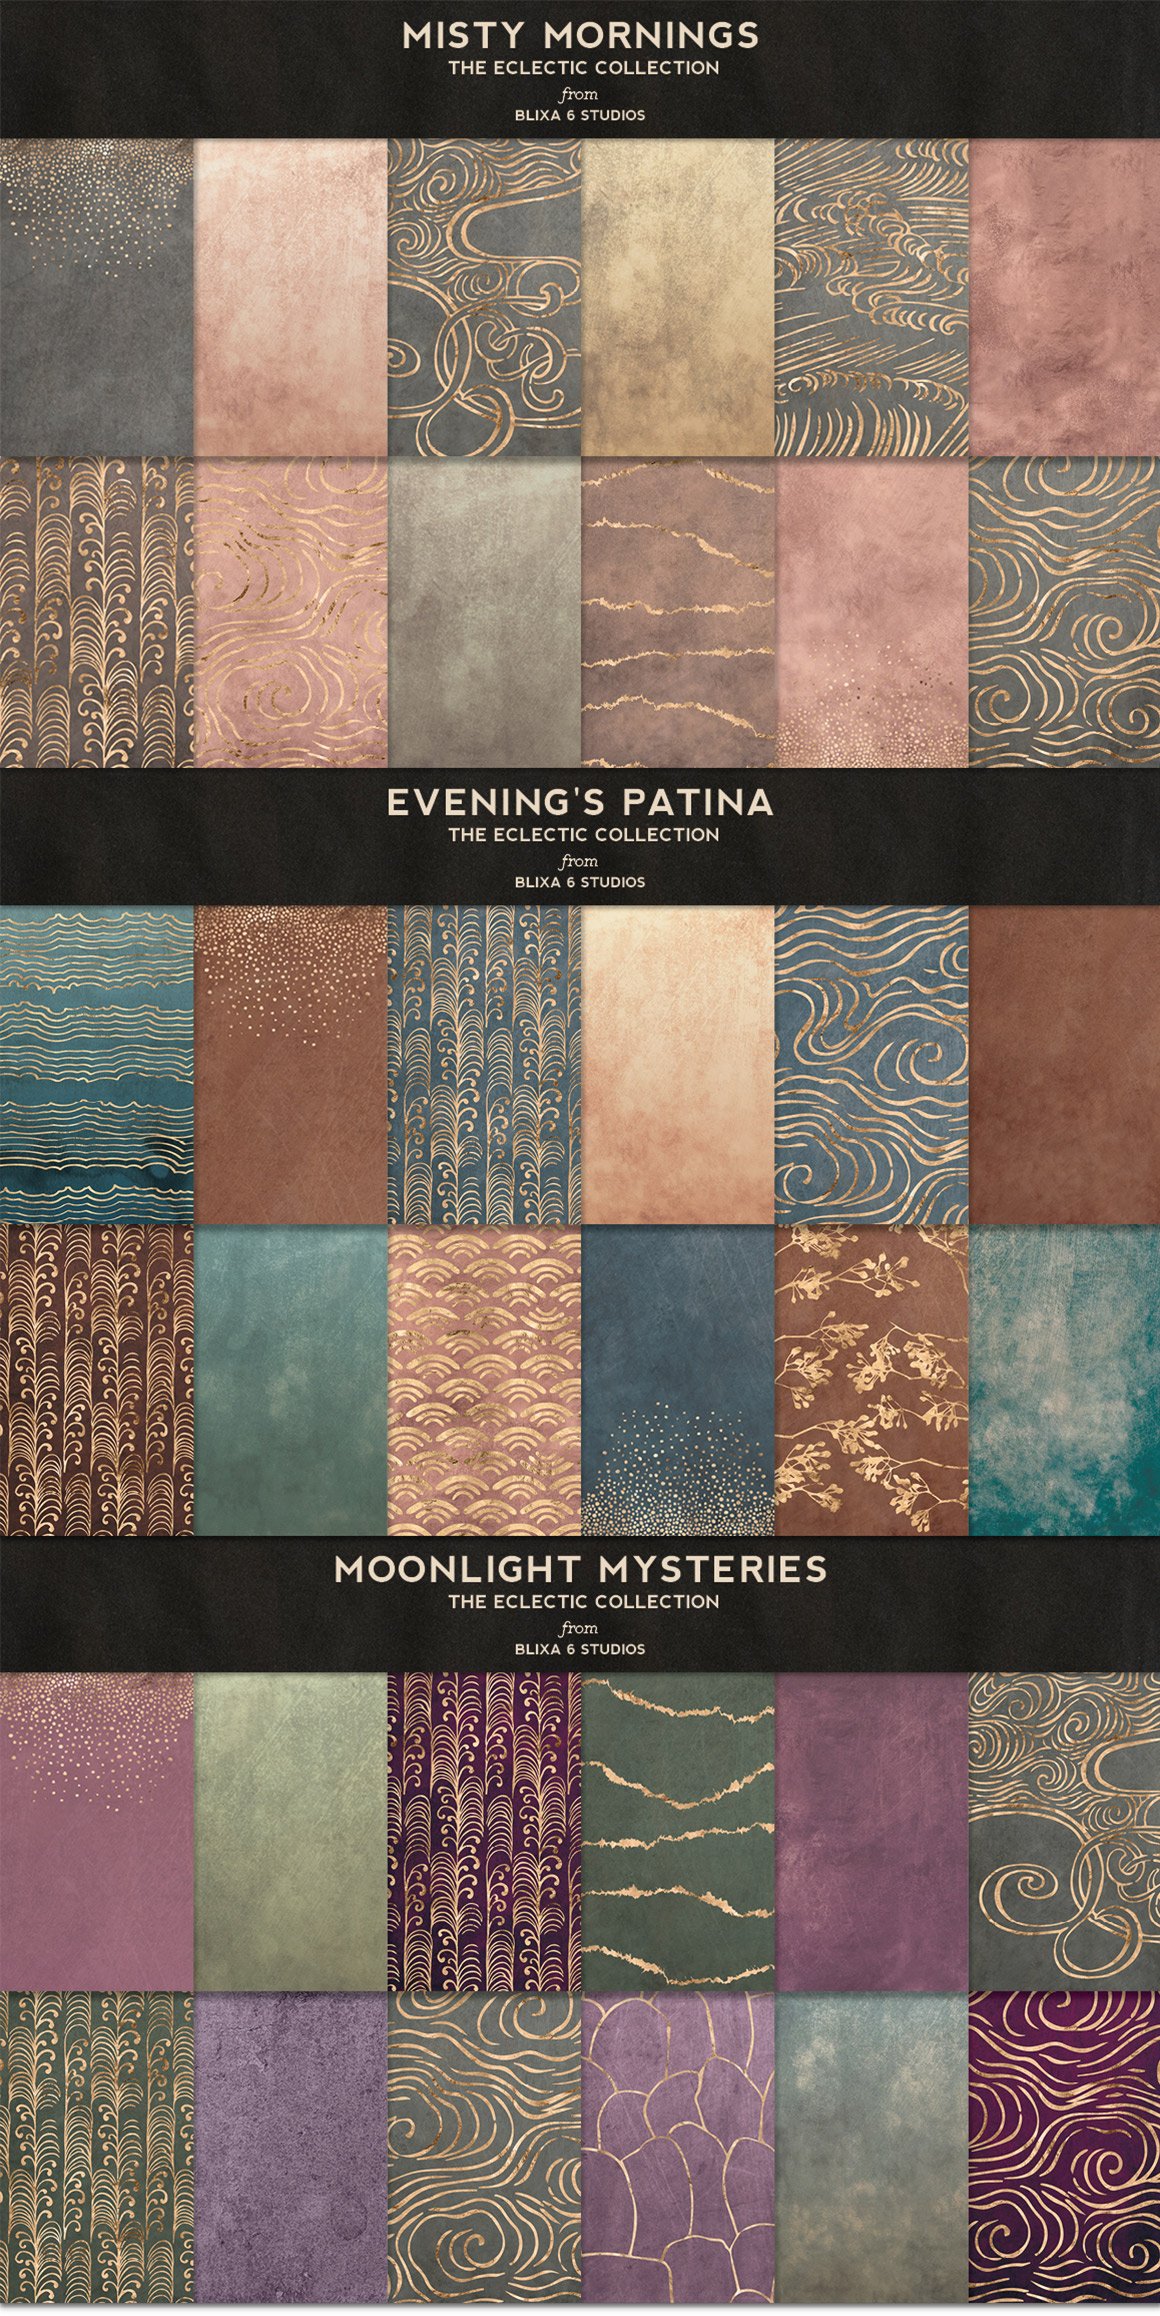  Totally Extensive Textures and Patterns Bundle